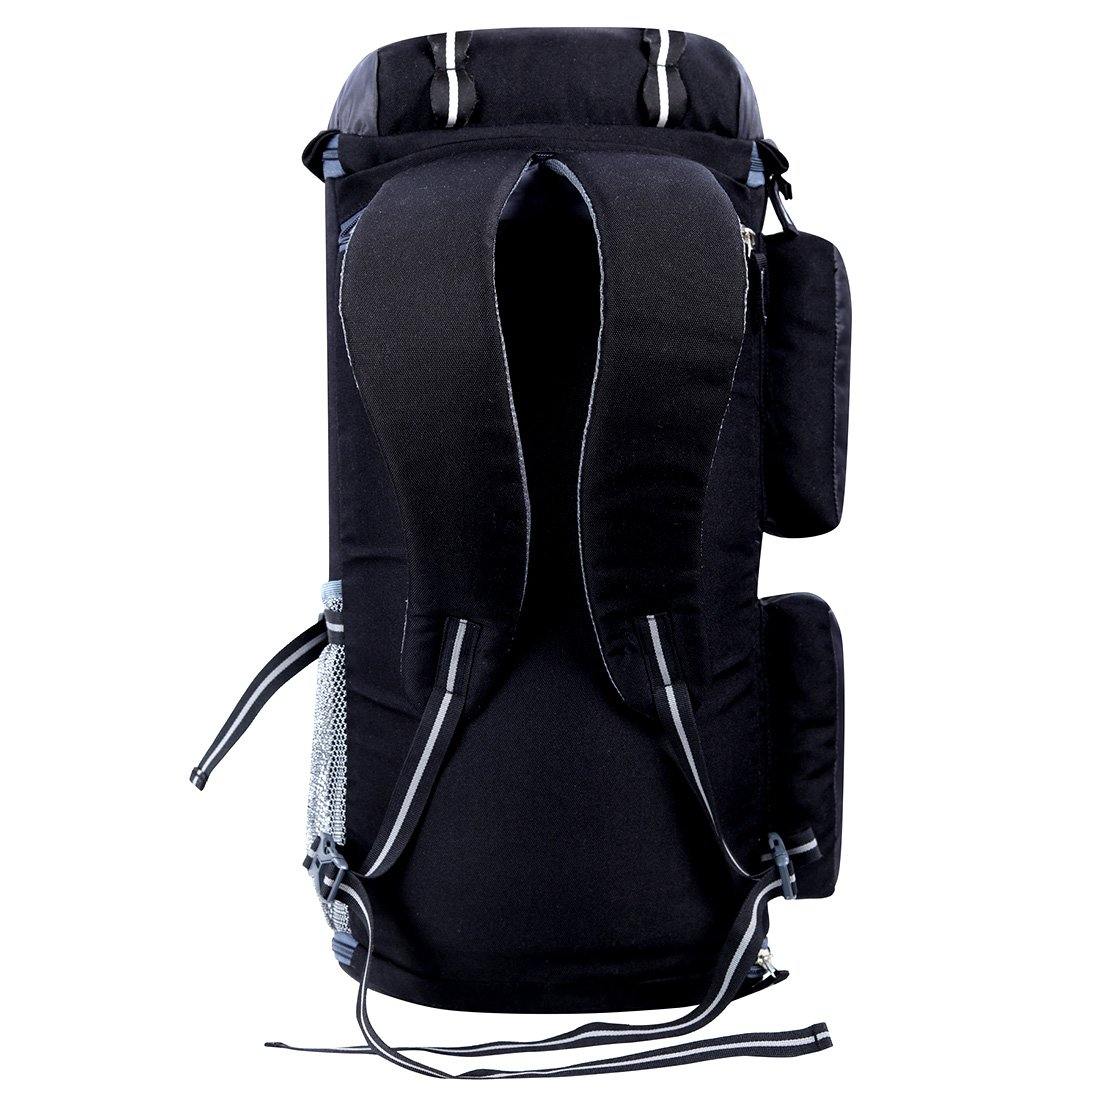 Leather World Black & Grey Casual  Rucksack With Shoe Compartment - Leatherworldonline.net